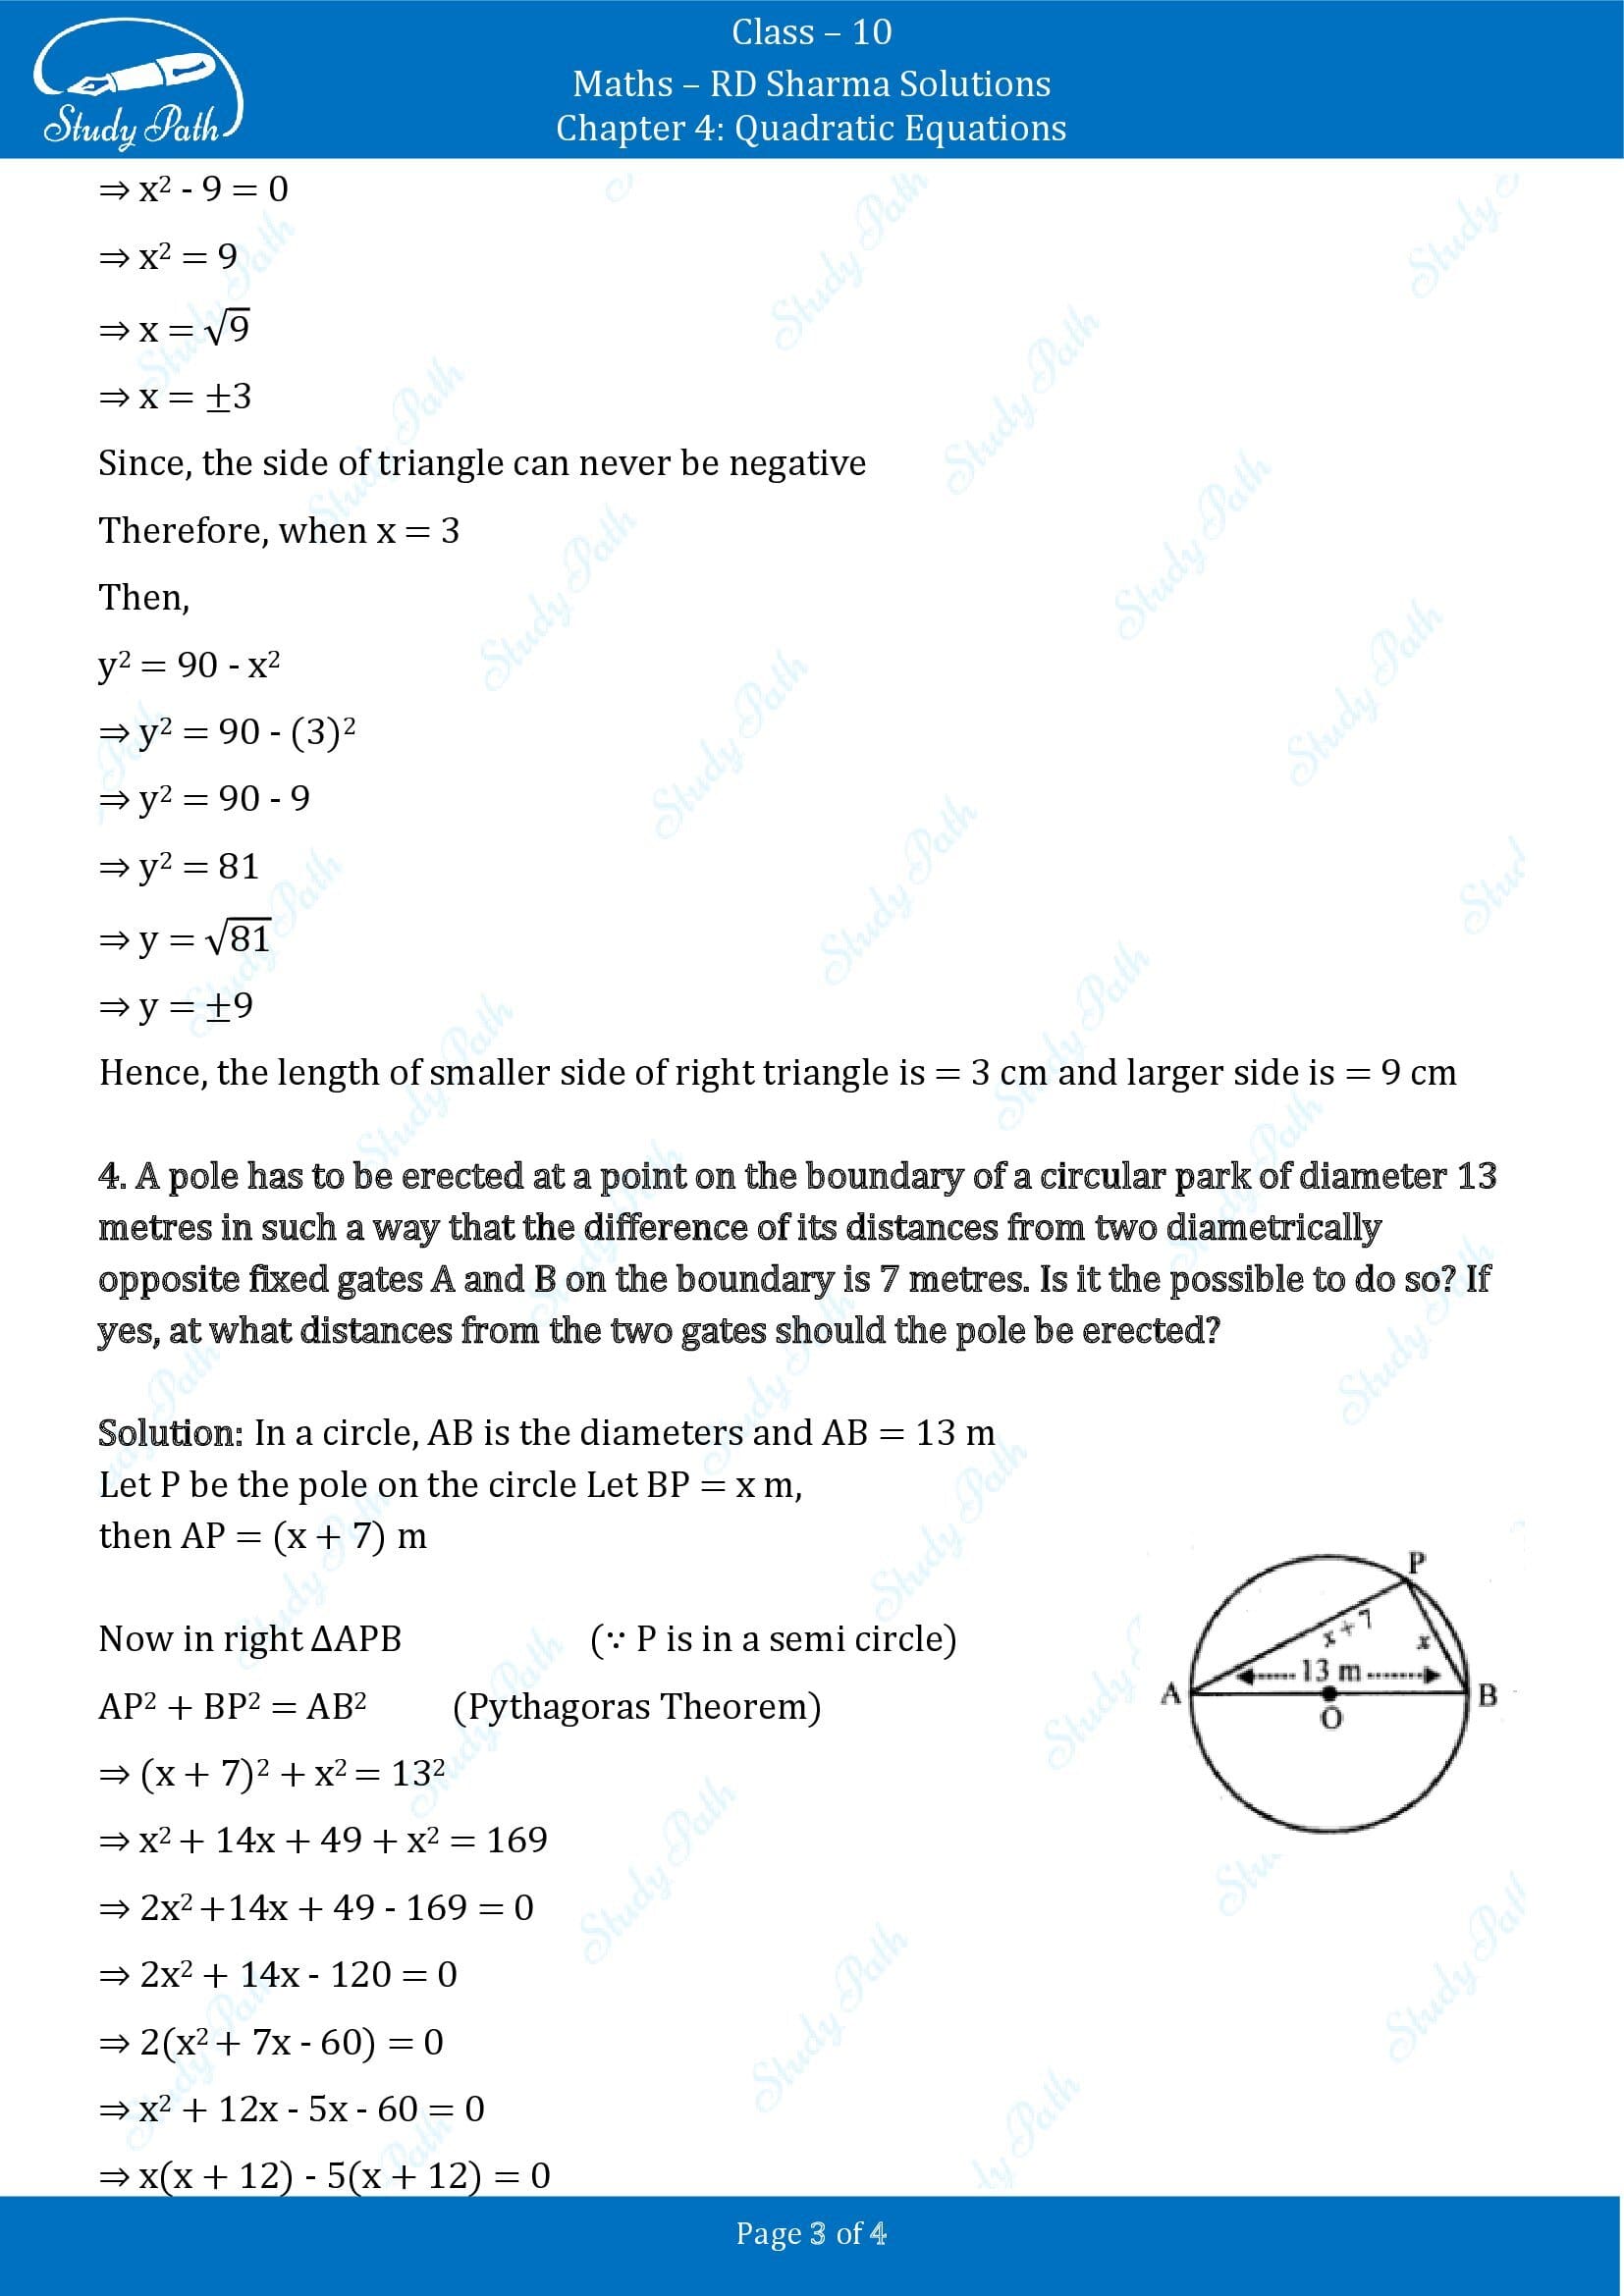 RD Sharma Solutions Class 10 Chapter 4 Quadratic Equations Exercise 4.10 00003